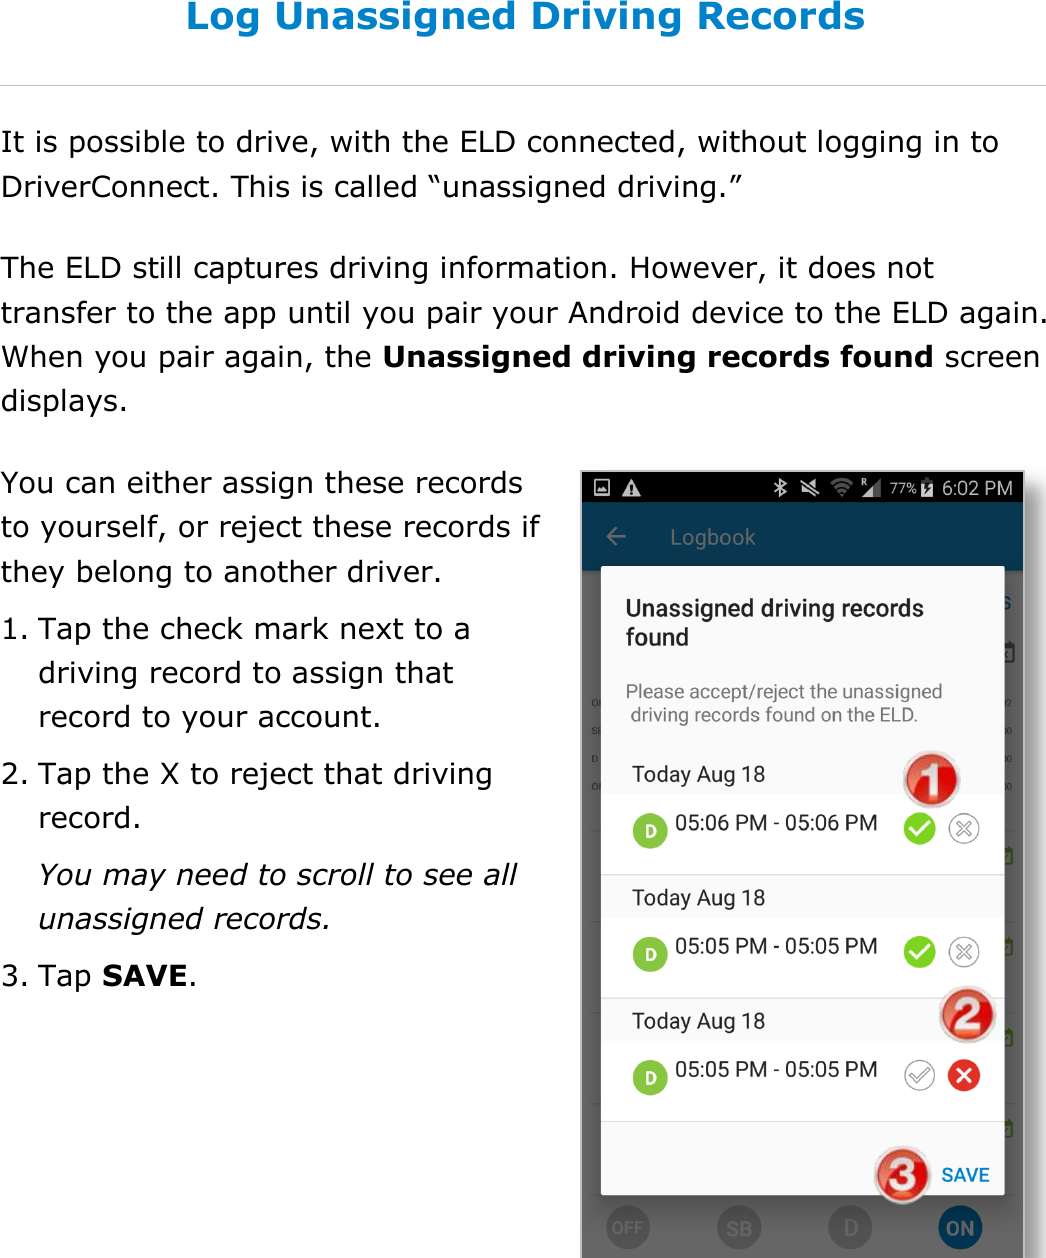 Manage Fuel Purchases DriverConnect User Guide  52 © 2017, Rand McNally, Inc. Log Unassigned Driving Records It is possible to drive, with the ELD connected, without logging in to DriverConnect. This is called “unassigned driving.” The ELD still captures driving information. However, it does not transfer to the app until you pair your Android device to the ELD again. When you pair again, the Unassigned driving records found screen displays. You can either assign these records to yourself, or reject these records if they belong to another driver. 1. Tap the check mark next to a driving record to assign that record to your account. 2. Tap the X to reject that driving record. You may need to scroll to see all unassigned records. 3. Tap SAVE. 